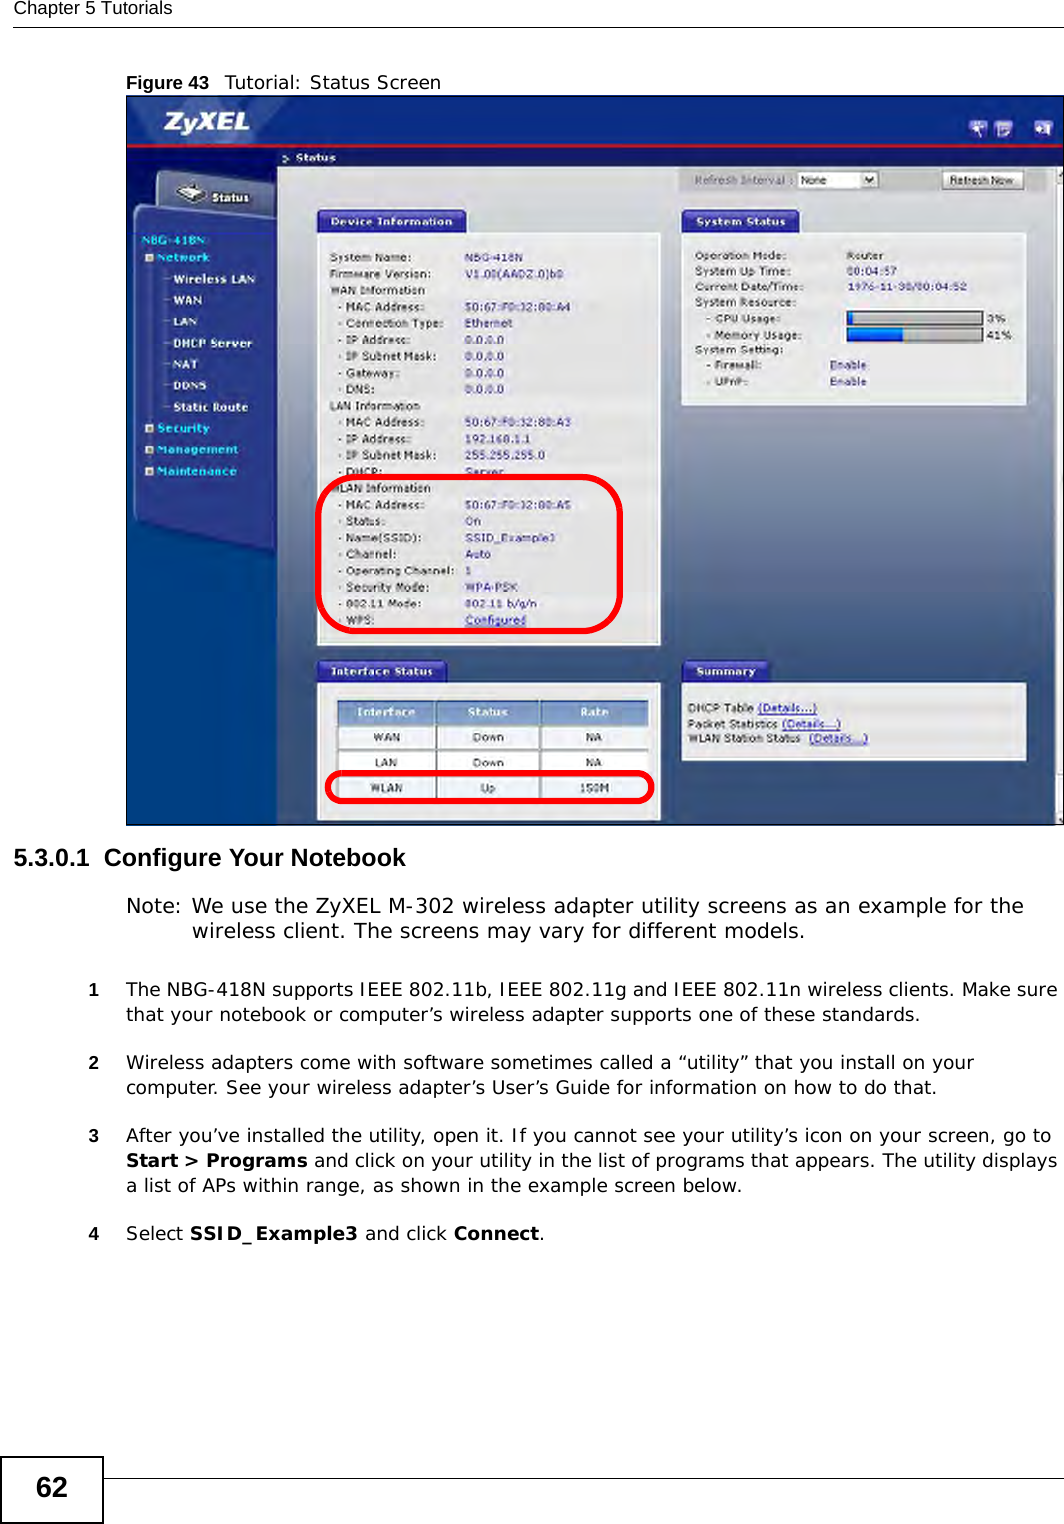 Chapter 5 Tutorials62Figure 43   Tutorial: Status Screen5.3.0.1  Configure Your NotebookNote: We use the ZyXEL M-302 wireless adapter utility screens as an example for the wireless client. The screens may vary for different models.1The NBG-418N supports IEEE 802.11b, IEEE 802.11g and IEEE 802.11n wireless clients. Make sure that your notebook or computer’s wireless adapter supports one of these standards.2Wireless adapters come with software sometimes called a “utility” that you install on your computer. See your wireless adapter’s User’s Guide for information on how to do that.3After you’ve installed the utility, open it. If you cannot see your utility’s icon on your screen, go to Start &gt; Programs and click on your utility in the list of programs that appears. The utility displays a list of APs within range, as shown in the example screen below.4Select SSID_Example3 and click Connect.